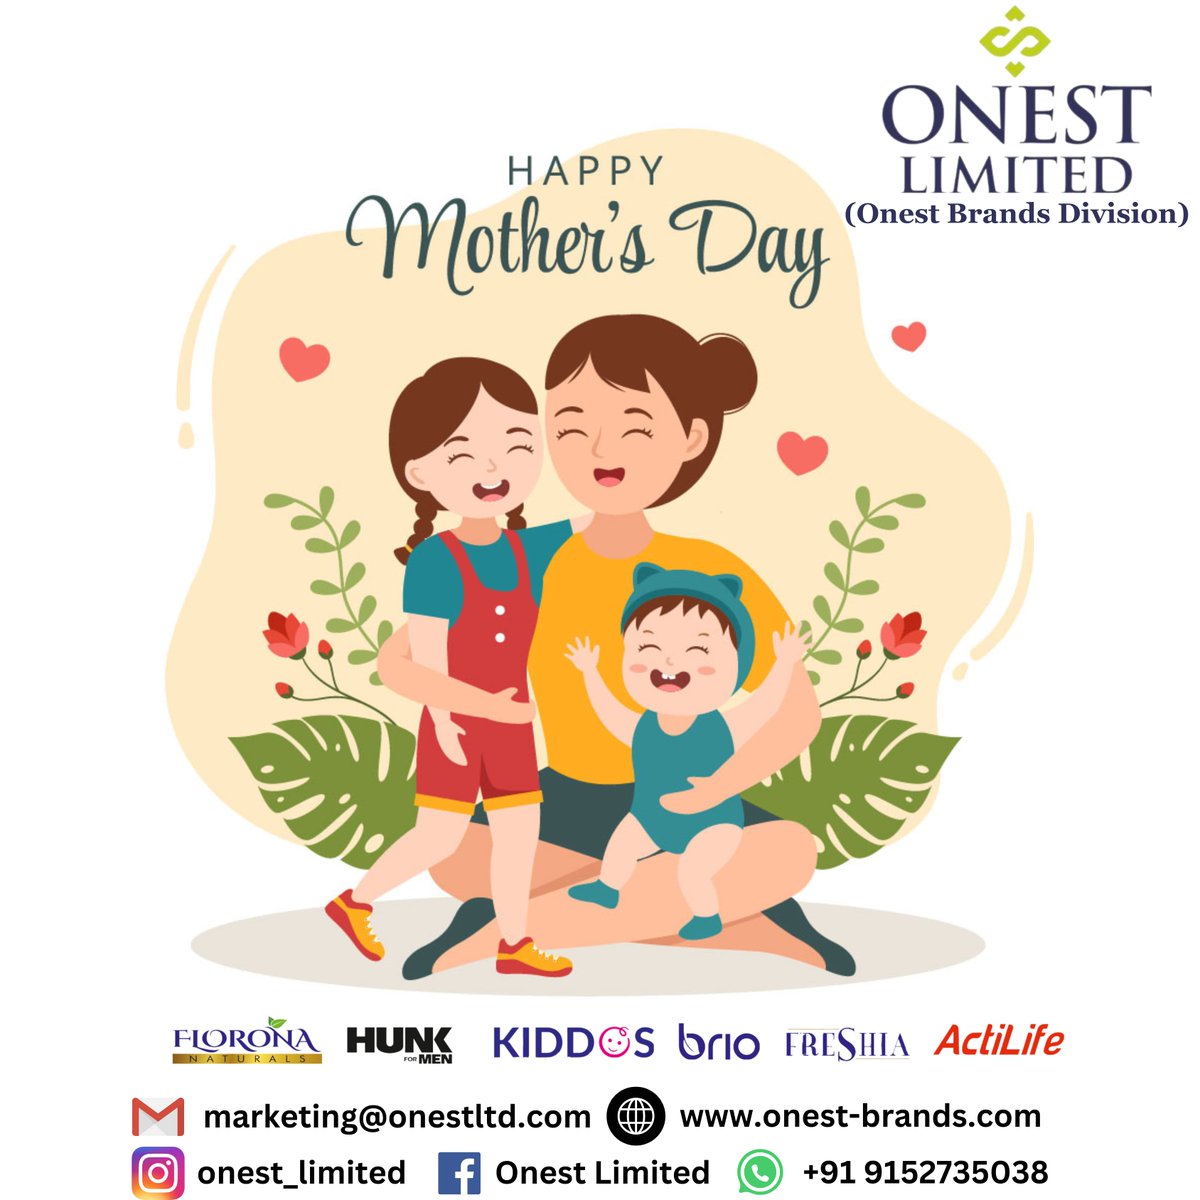 Mom, you’re the reason world is so beautiful. Happy Mother’s Day!

#onestlimited #onest #onestbrands #branding #mothersday #mother #happymothersday #floronanaturals #hunk #freshia #brio #actilife #kiddos #fmcg #exporter